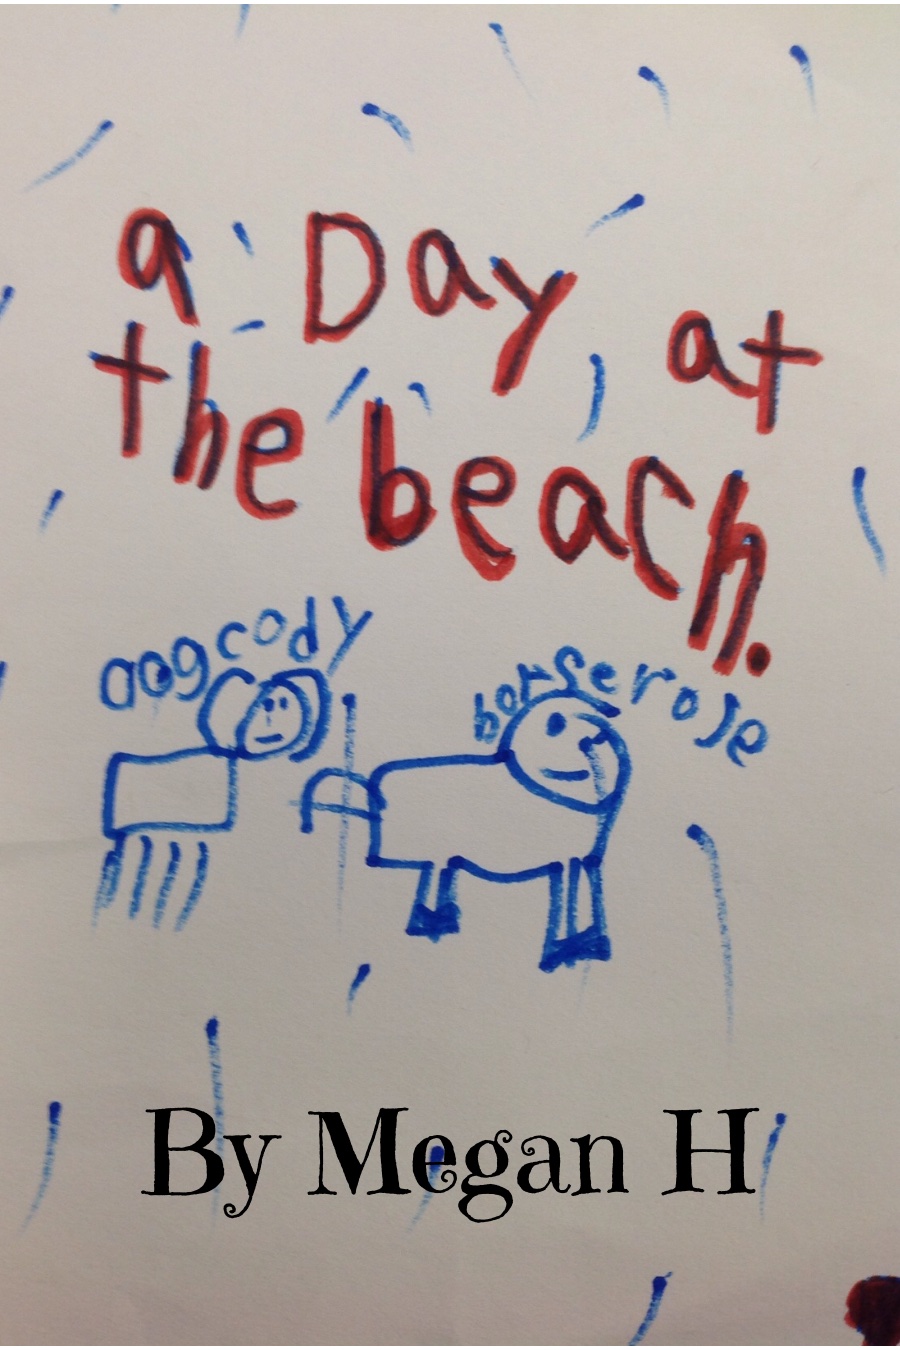 A Day at the Beach by Megan H